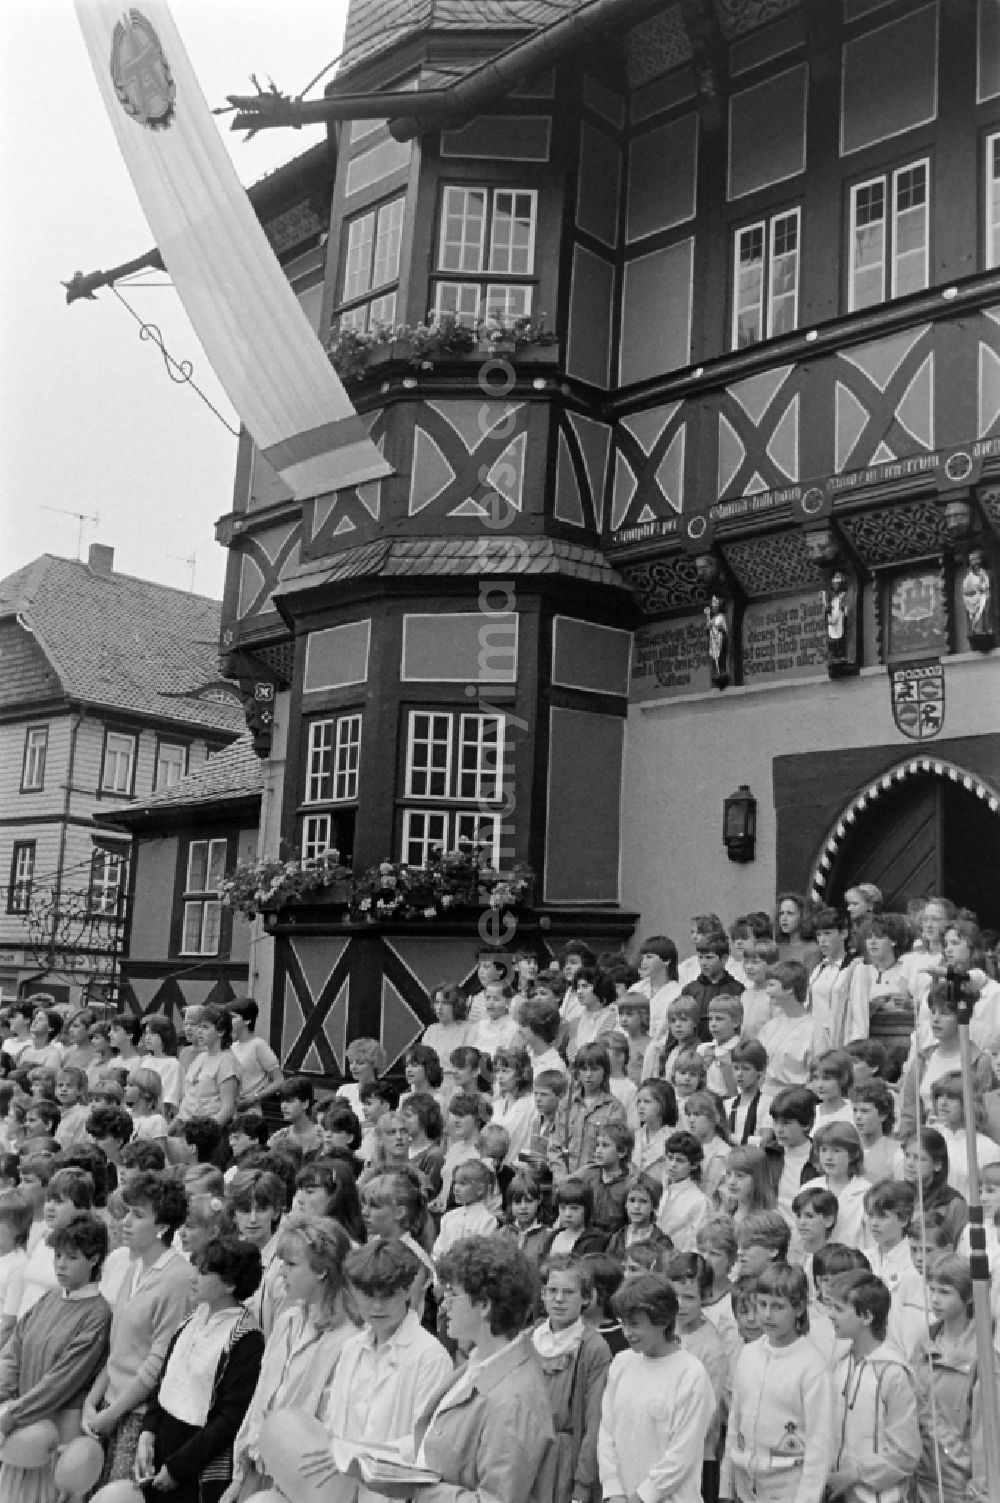 GDR picture archive: Wernigerode - Visitors at the 21st Workers' Festival in Wernigerode, Saxony-Anhalt in the territory of the former GDR, German Democratic Republic